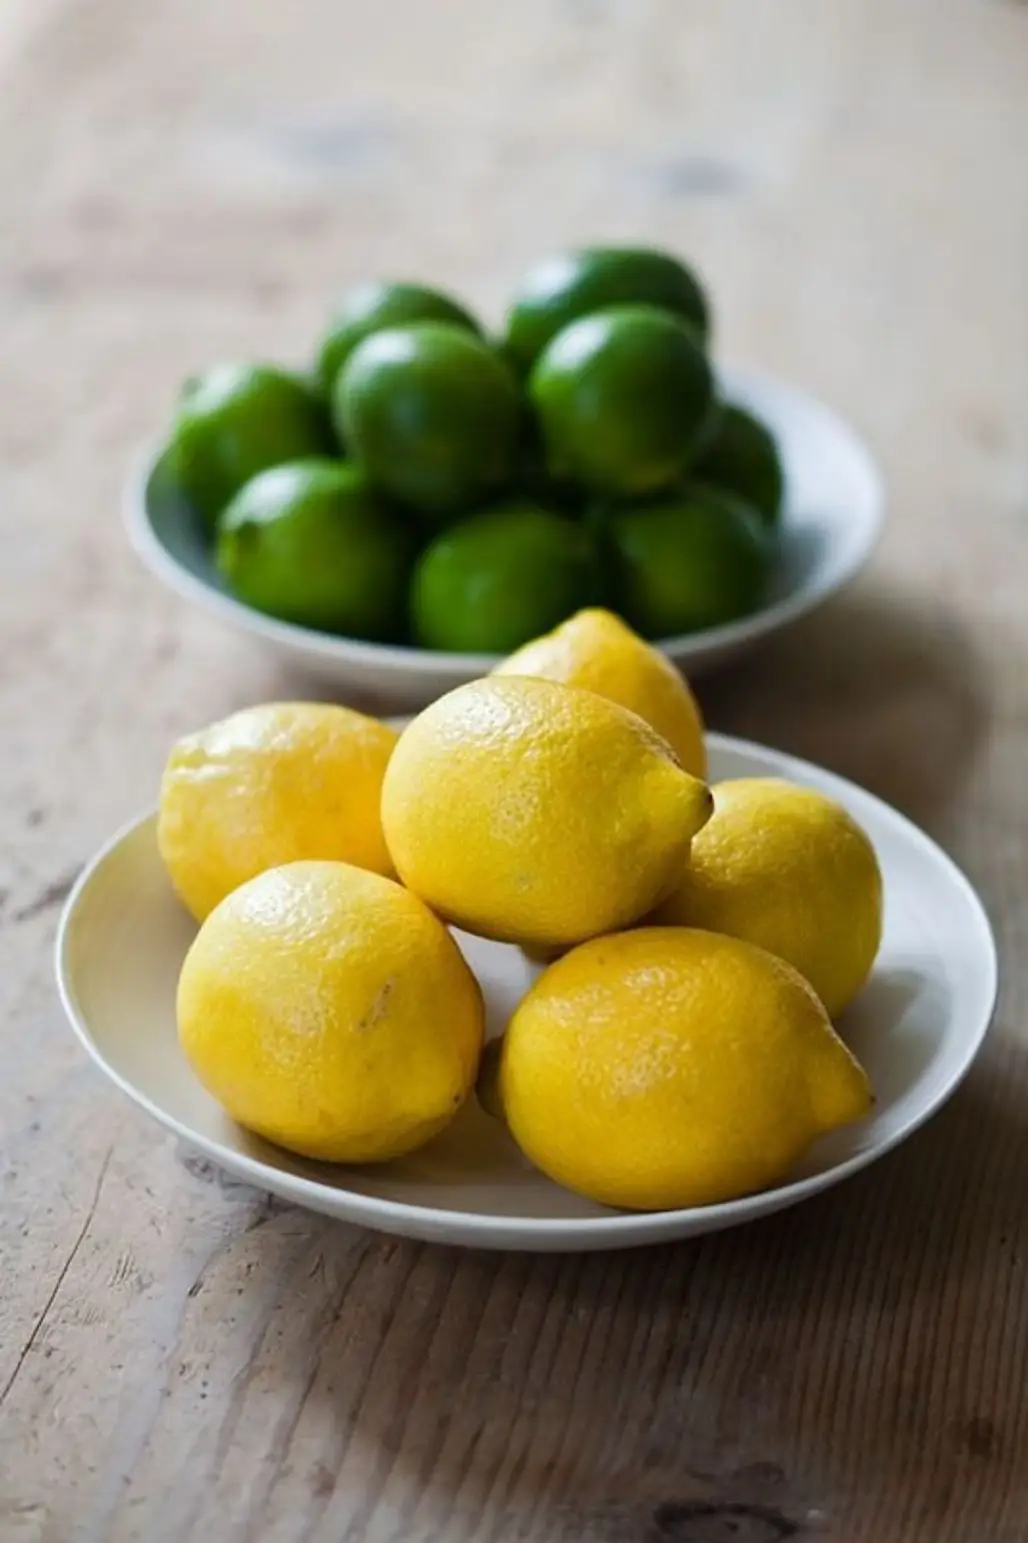 Alexander the Great and Lemons and Limes